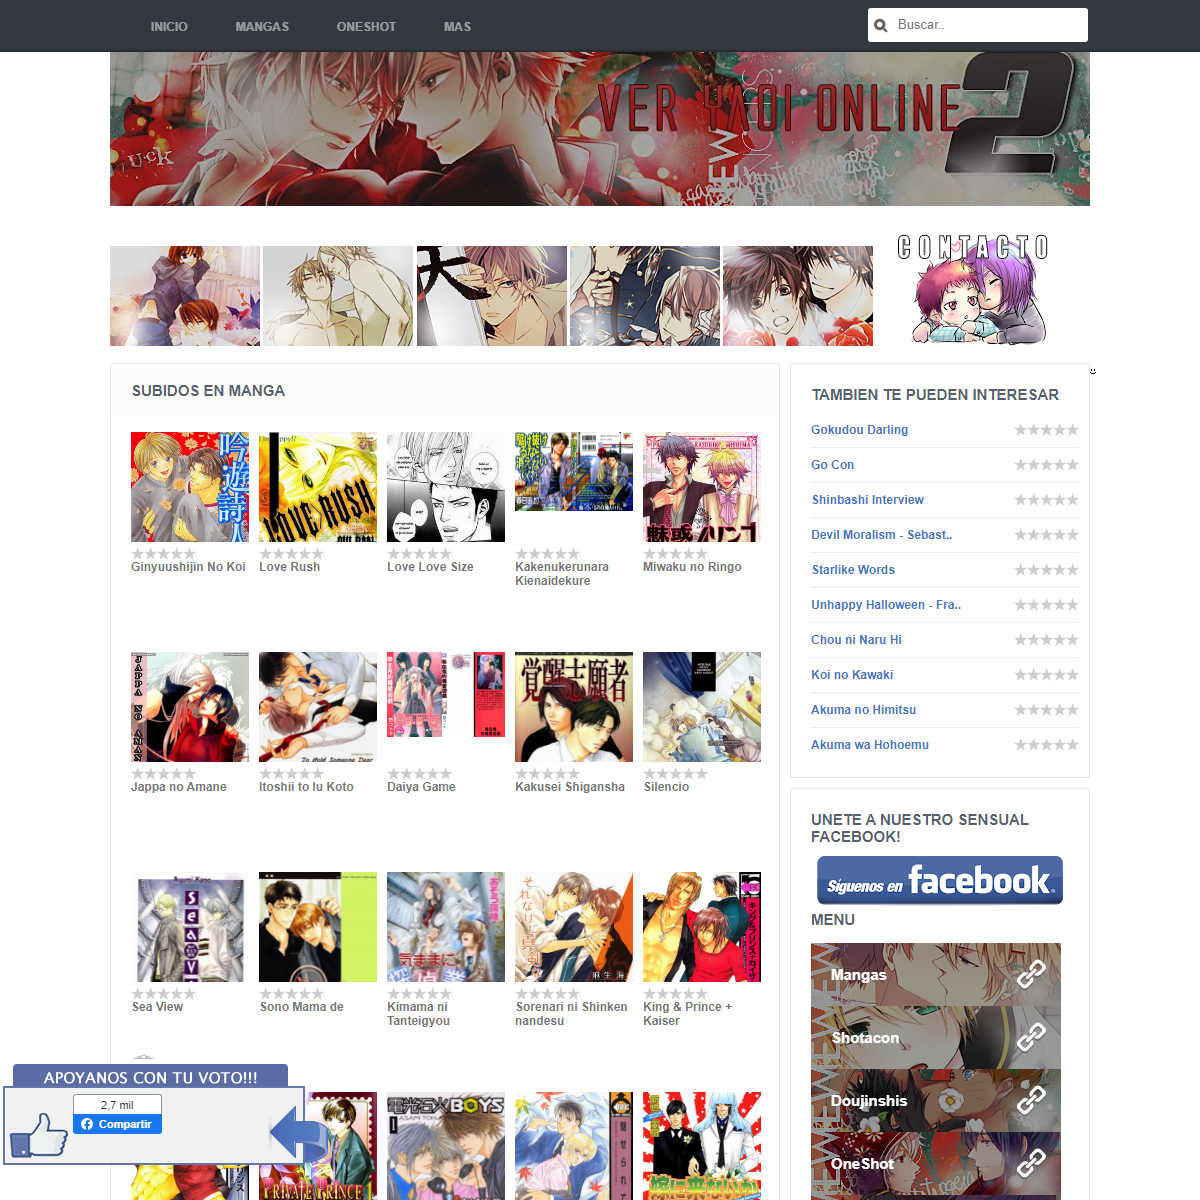 A complete backup of http://veryaoionline.net/categoria/manga/page/35